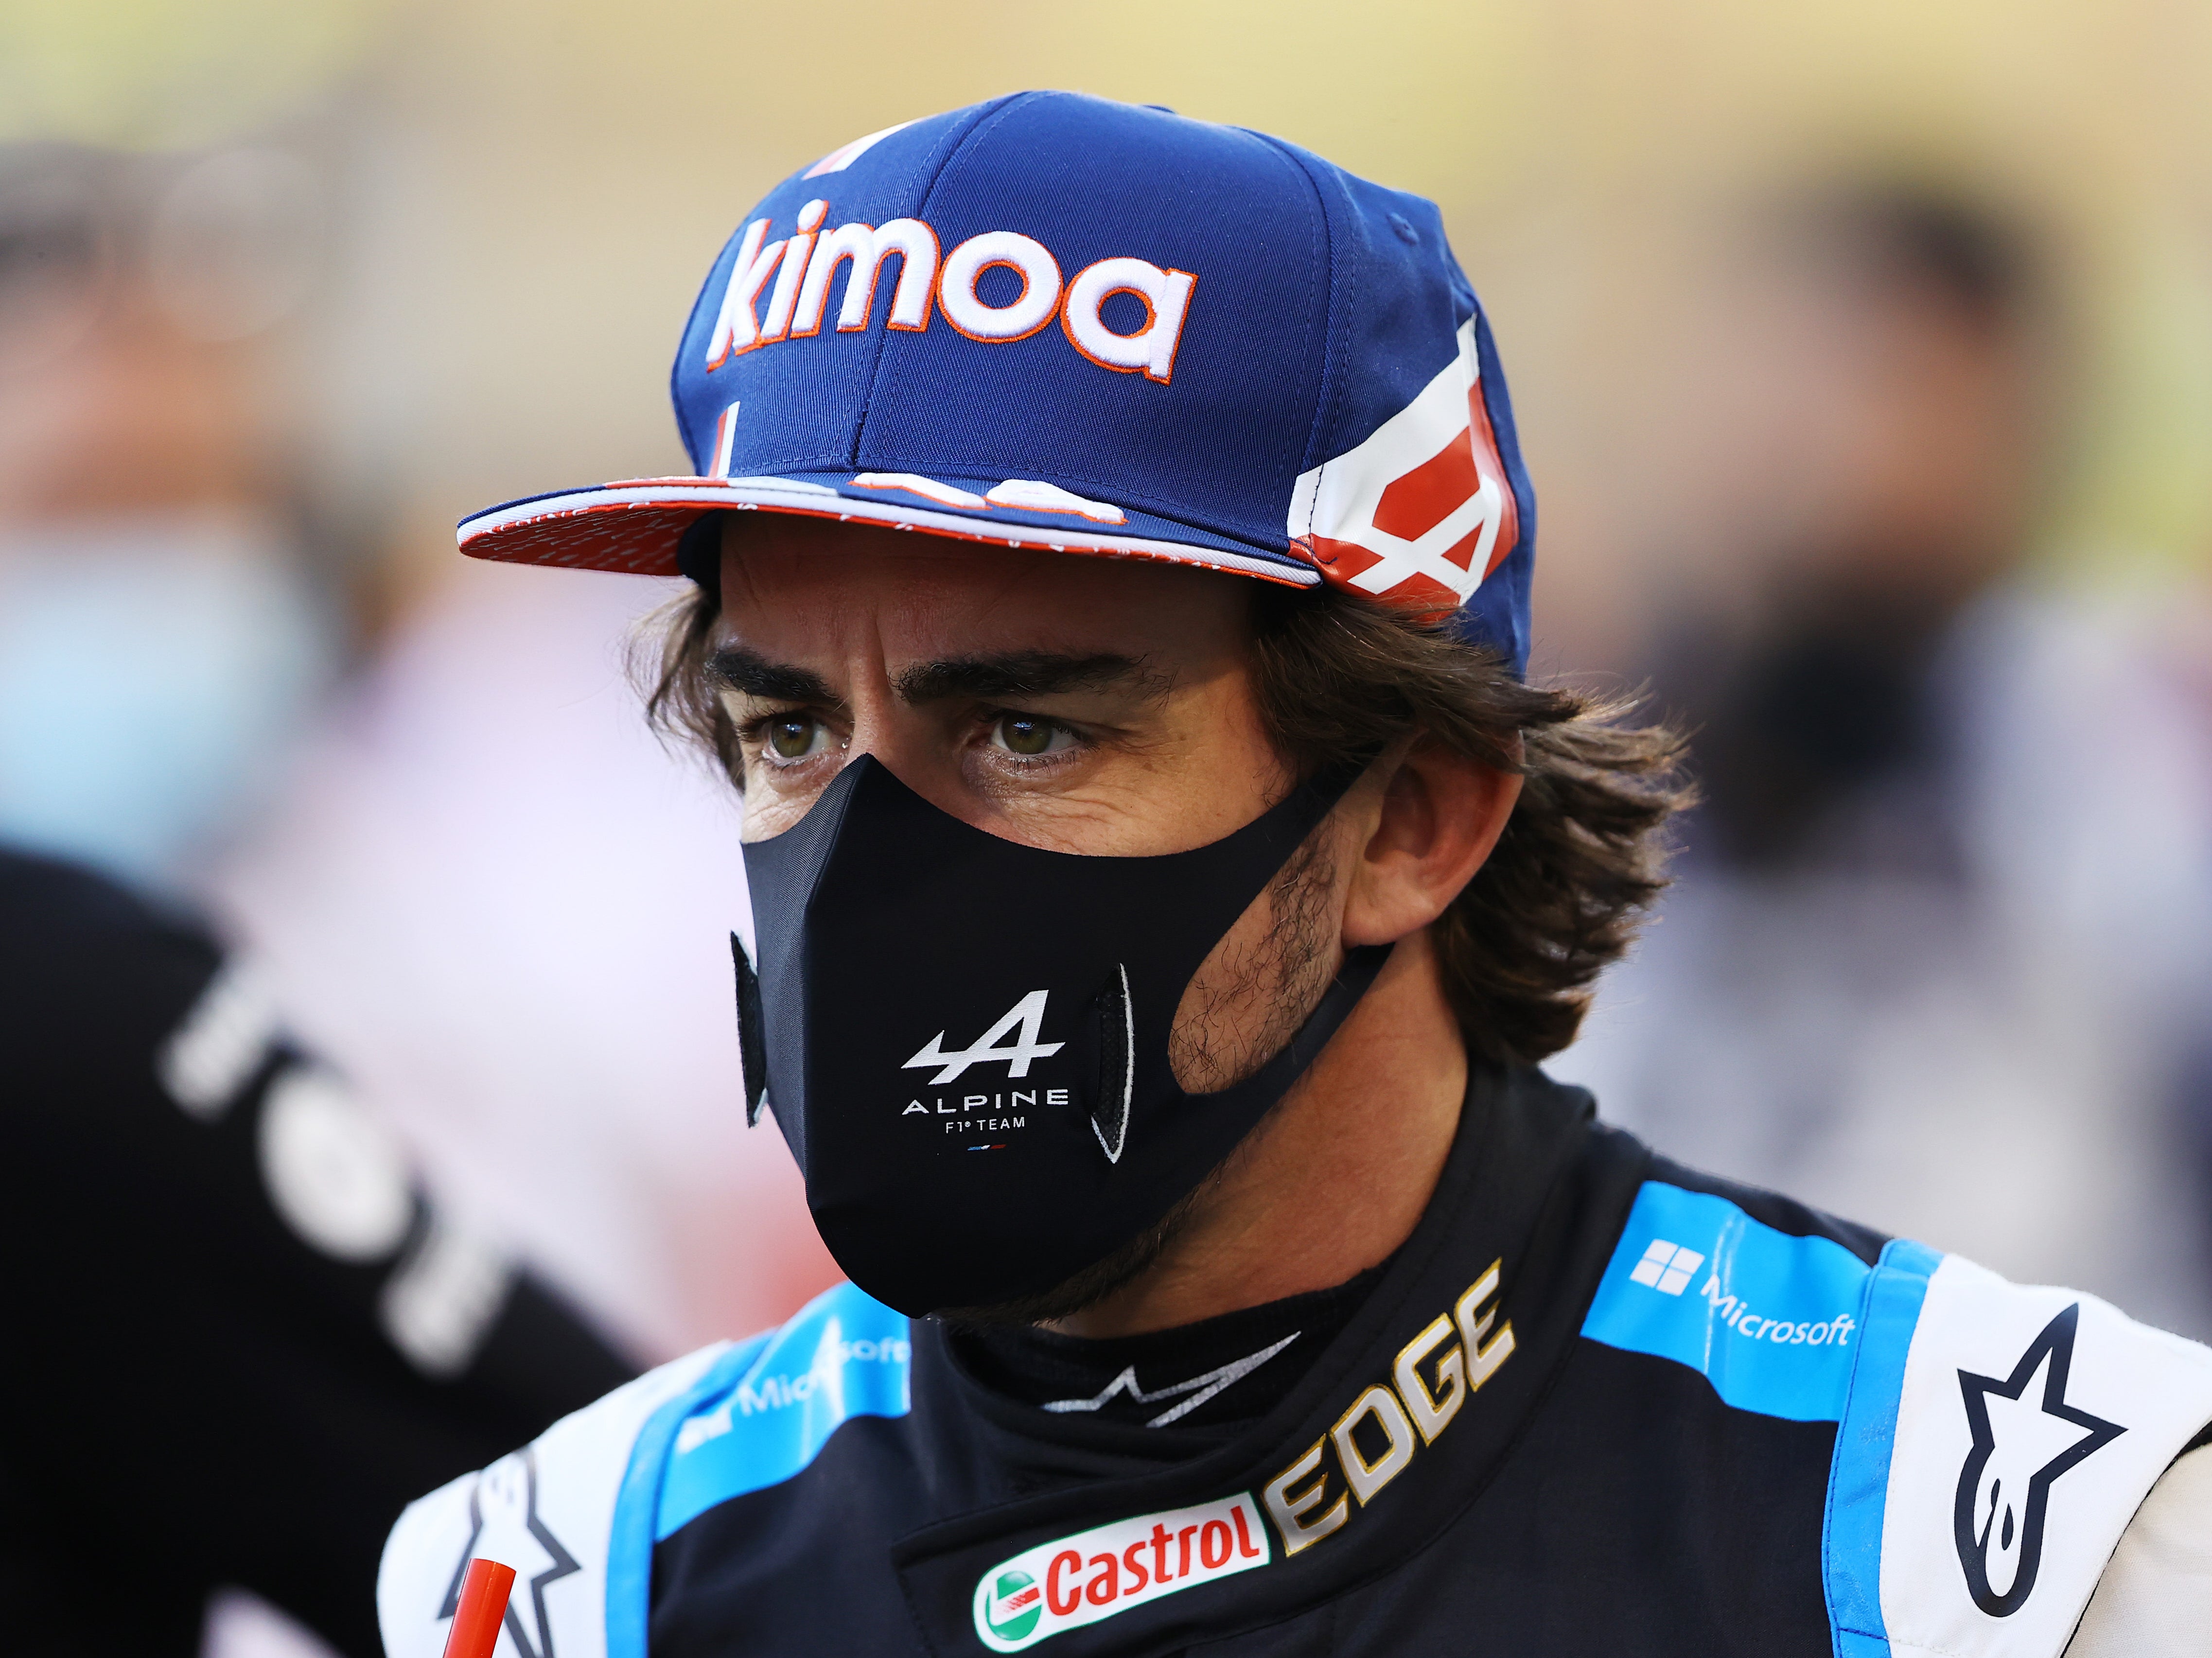 Fernando Alonso has enjoyed a solid return to Formula One with Alpine this season.